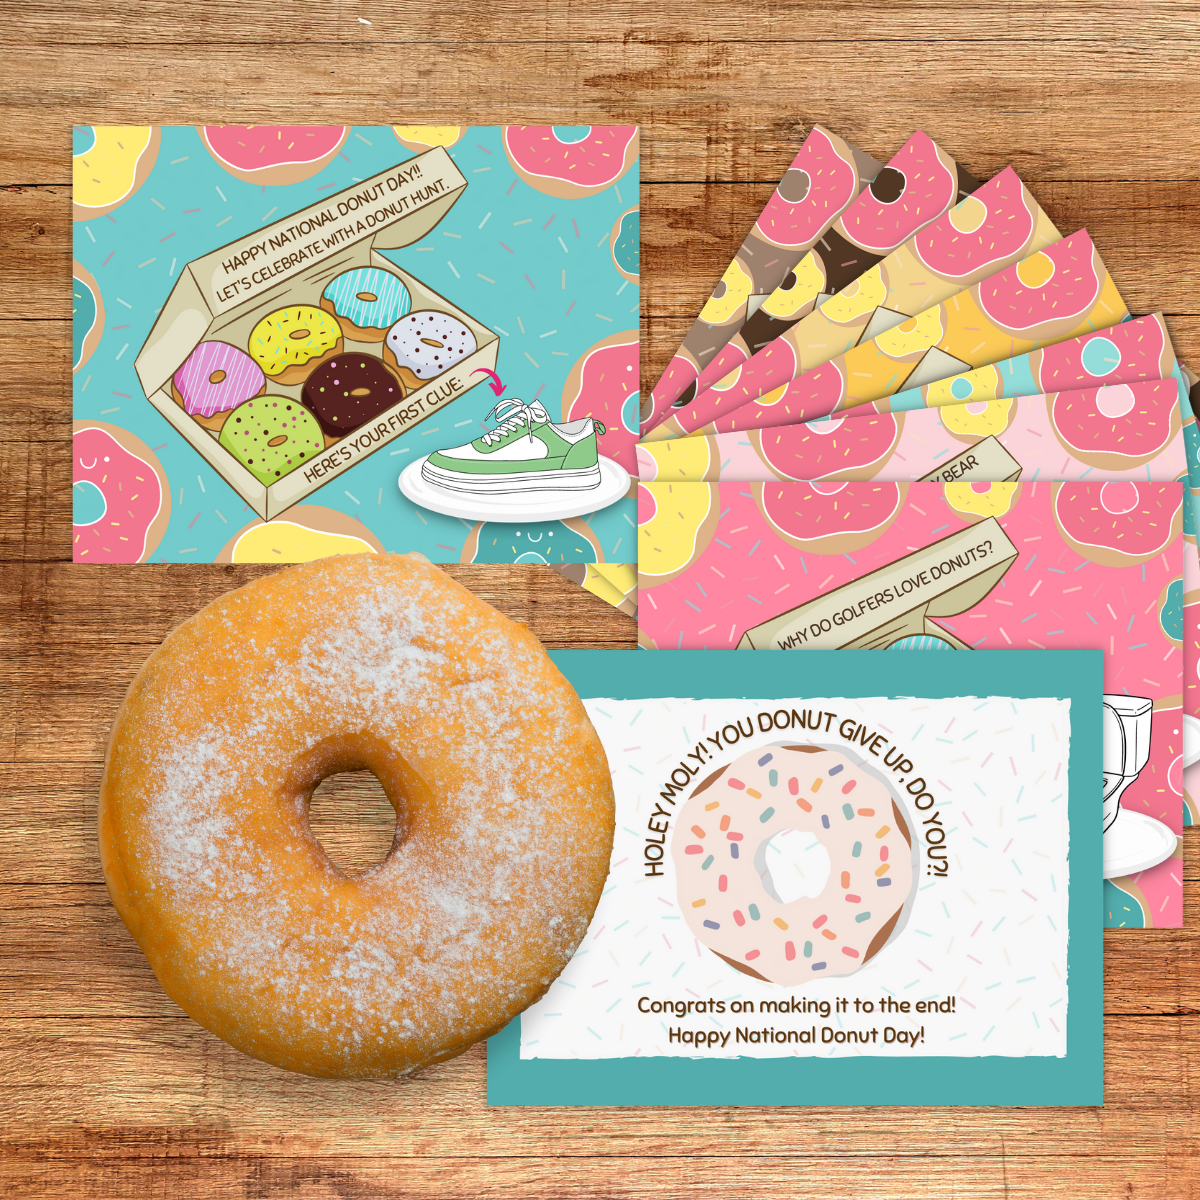 A yeast donut sits next to the full set of cards for the National Donut Day treasure hunt.